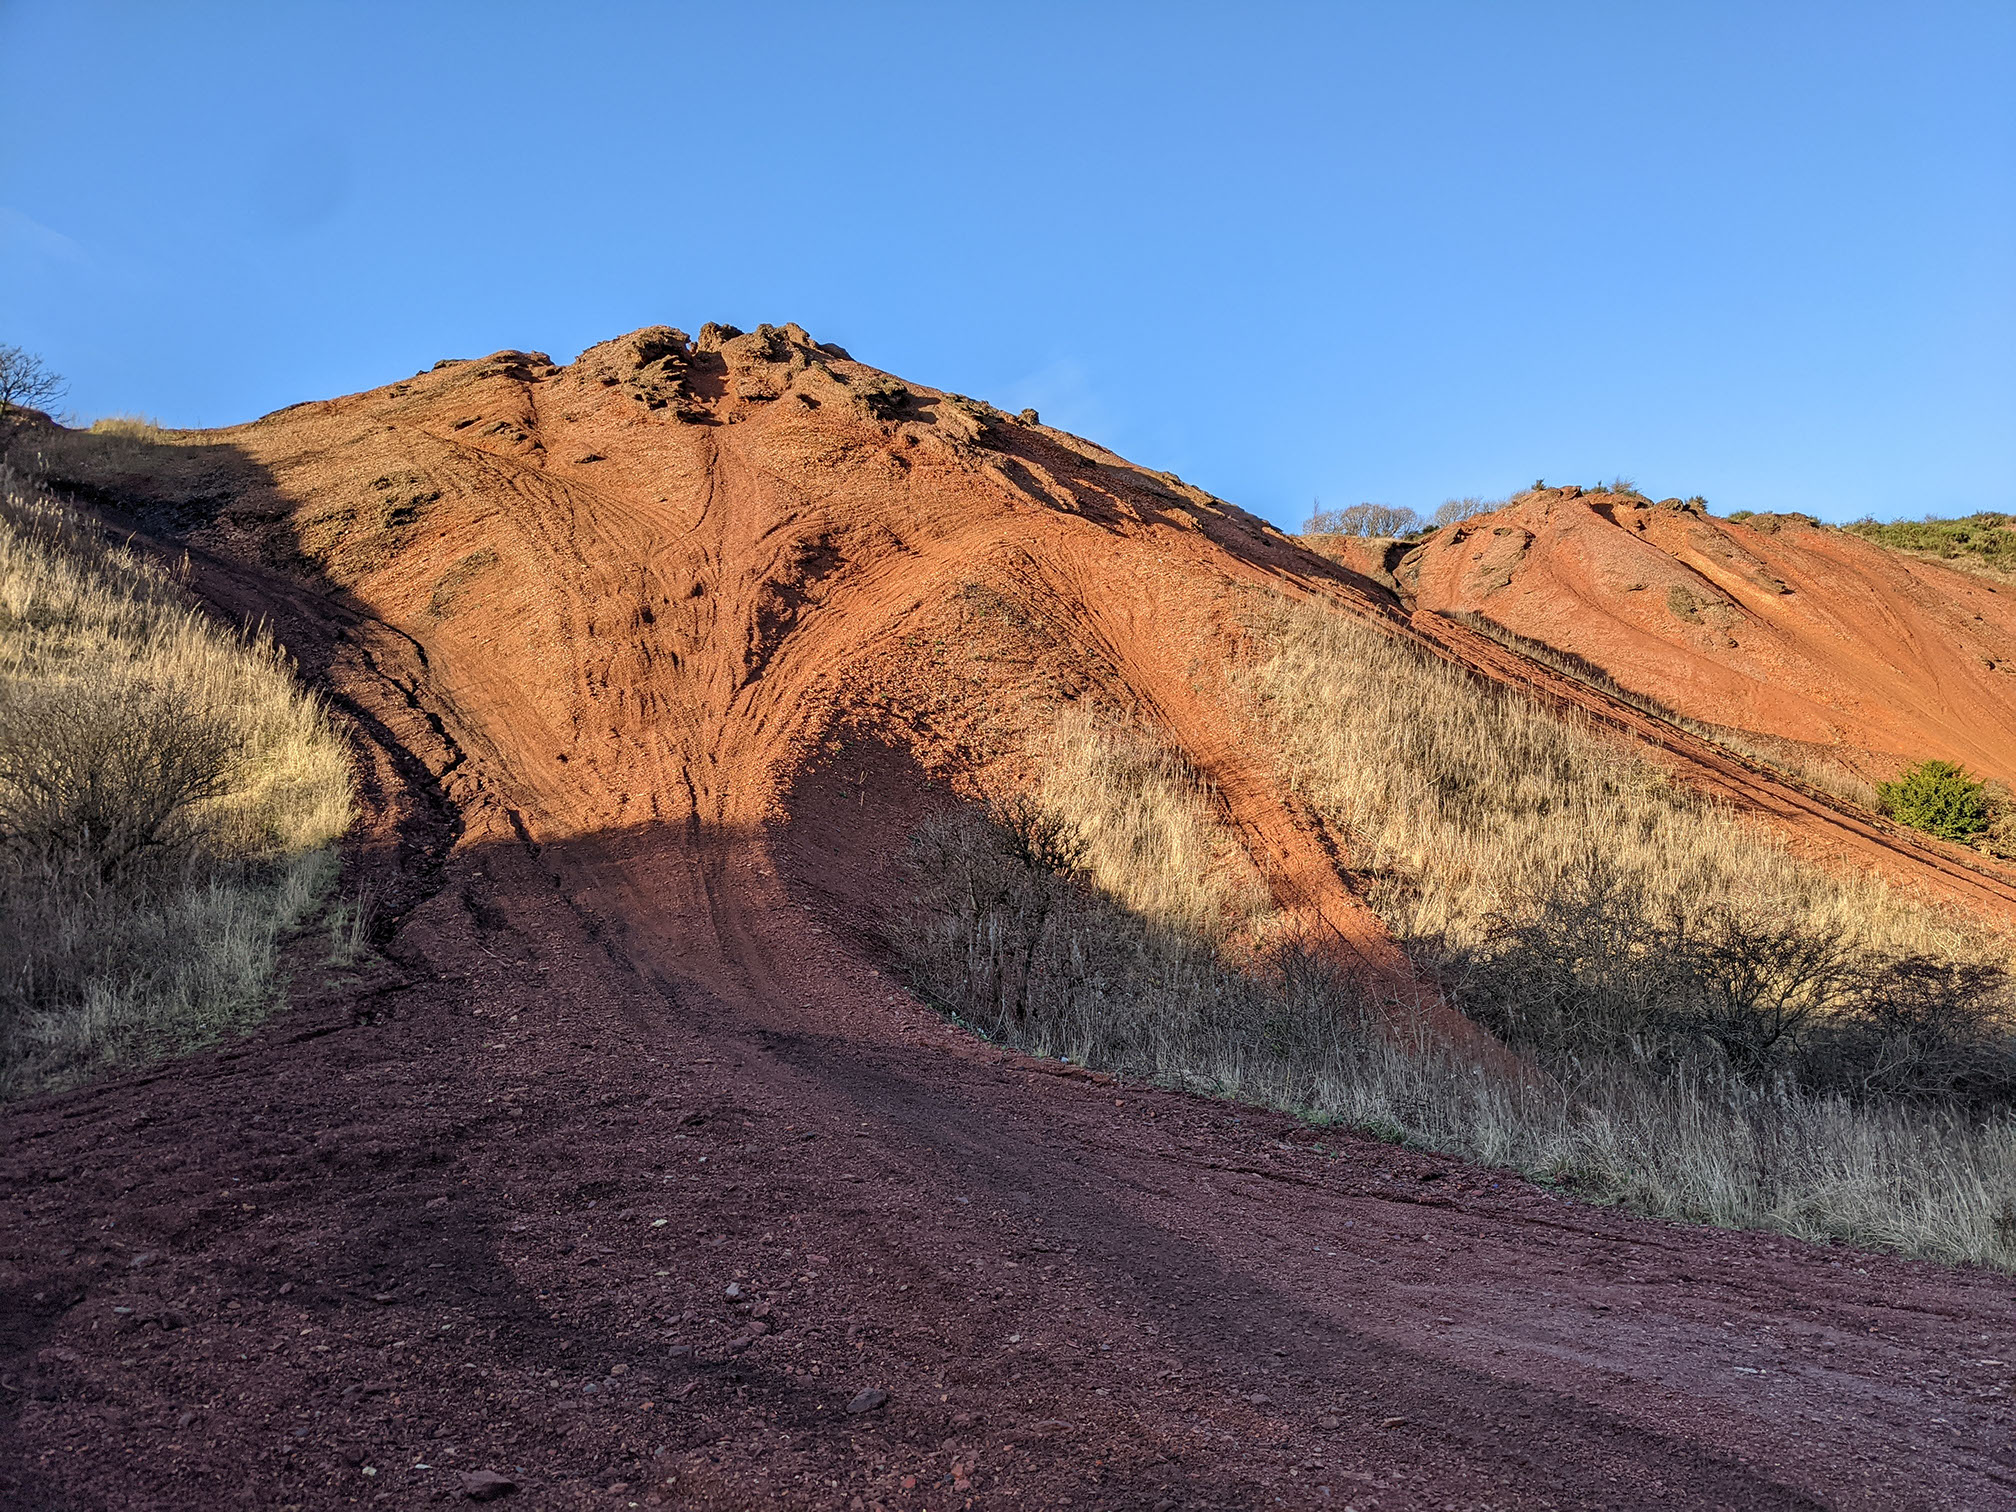 A view of an oil shale bing, coloured rusty orange, with a bright blue sky behind. The oil shle bings rises to a steep mound and is rutted with tracks and defiles. The foregound is in deep shadow.